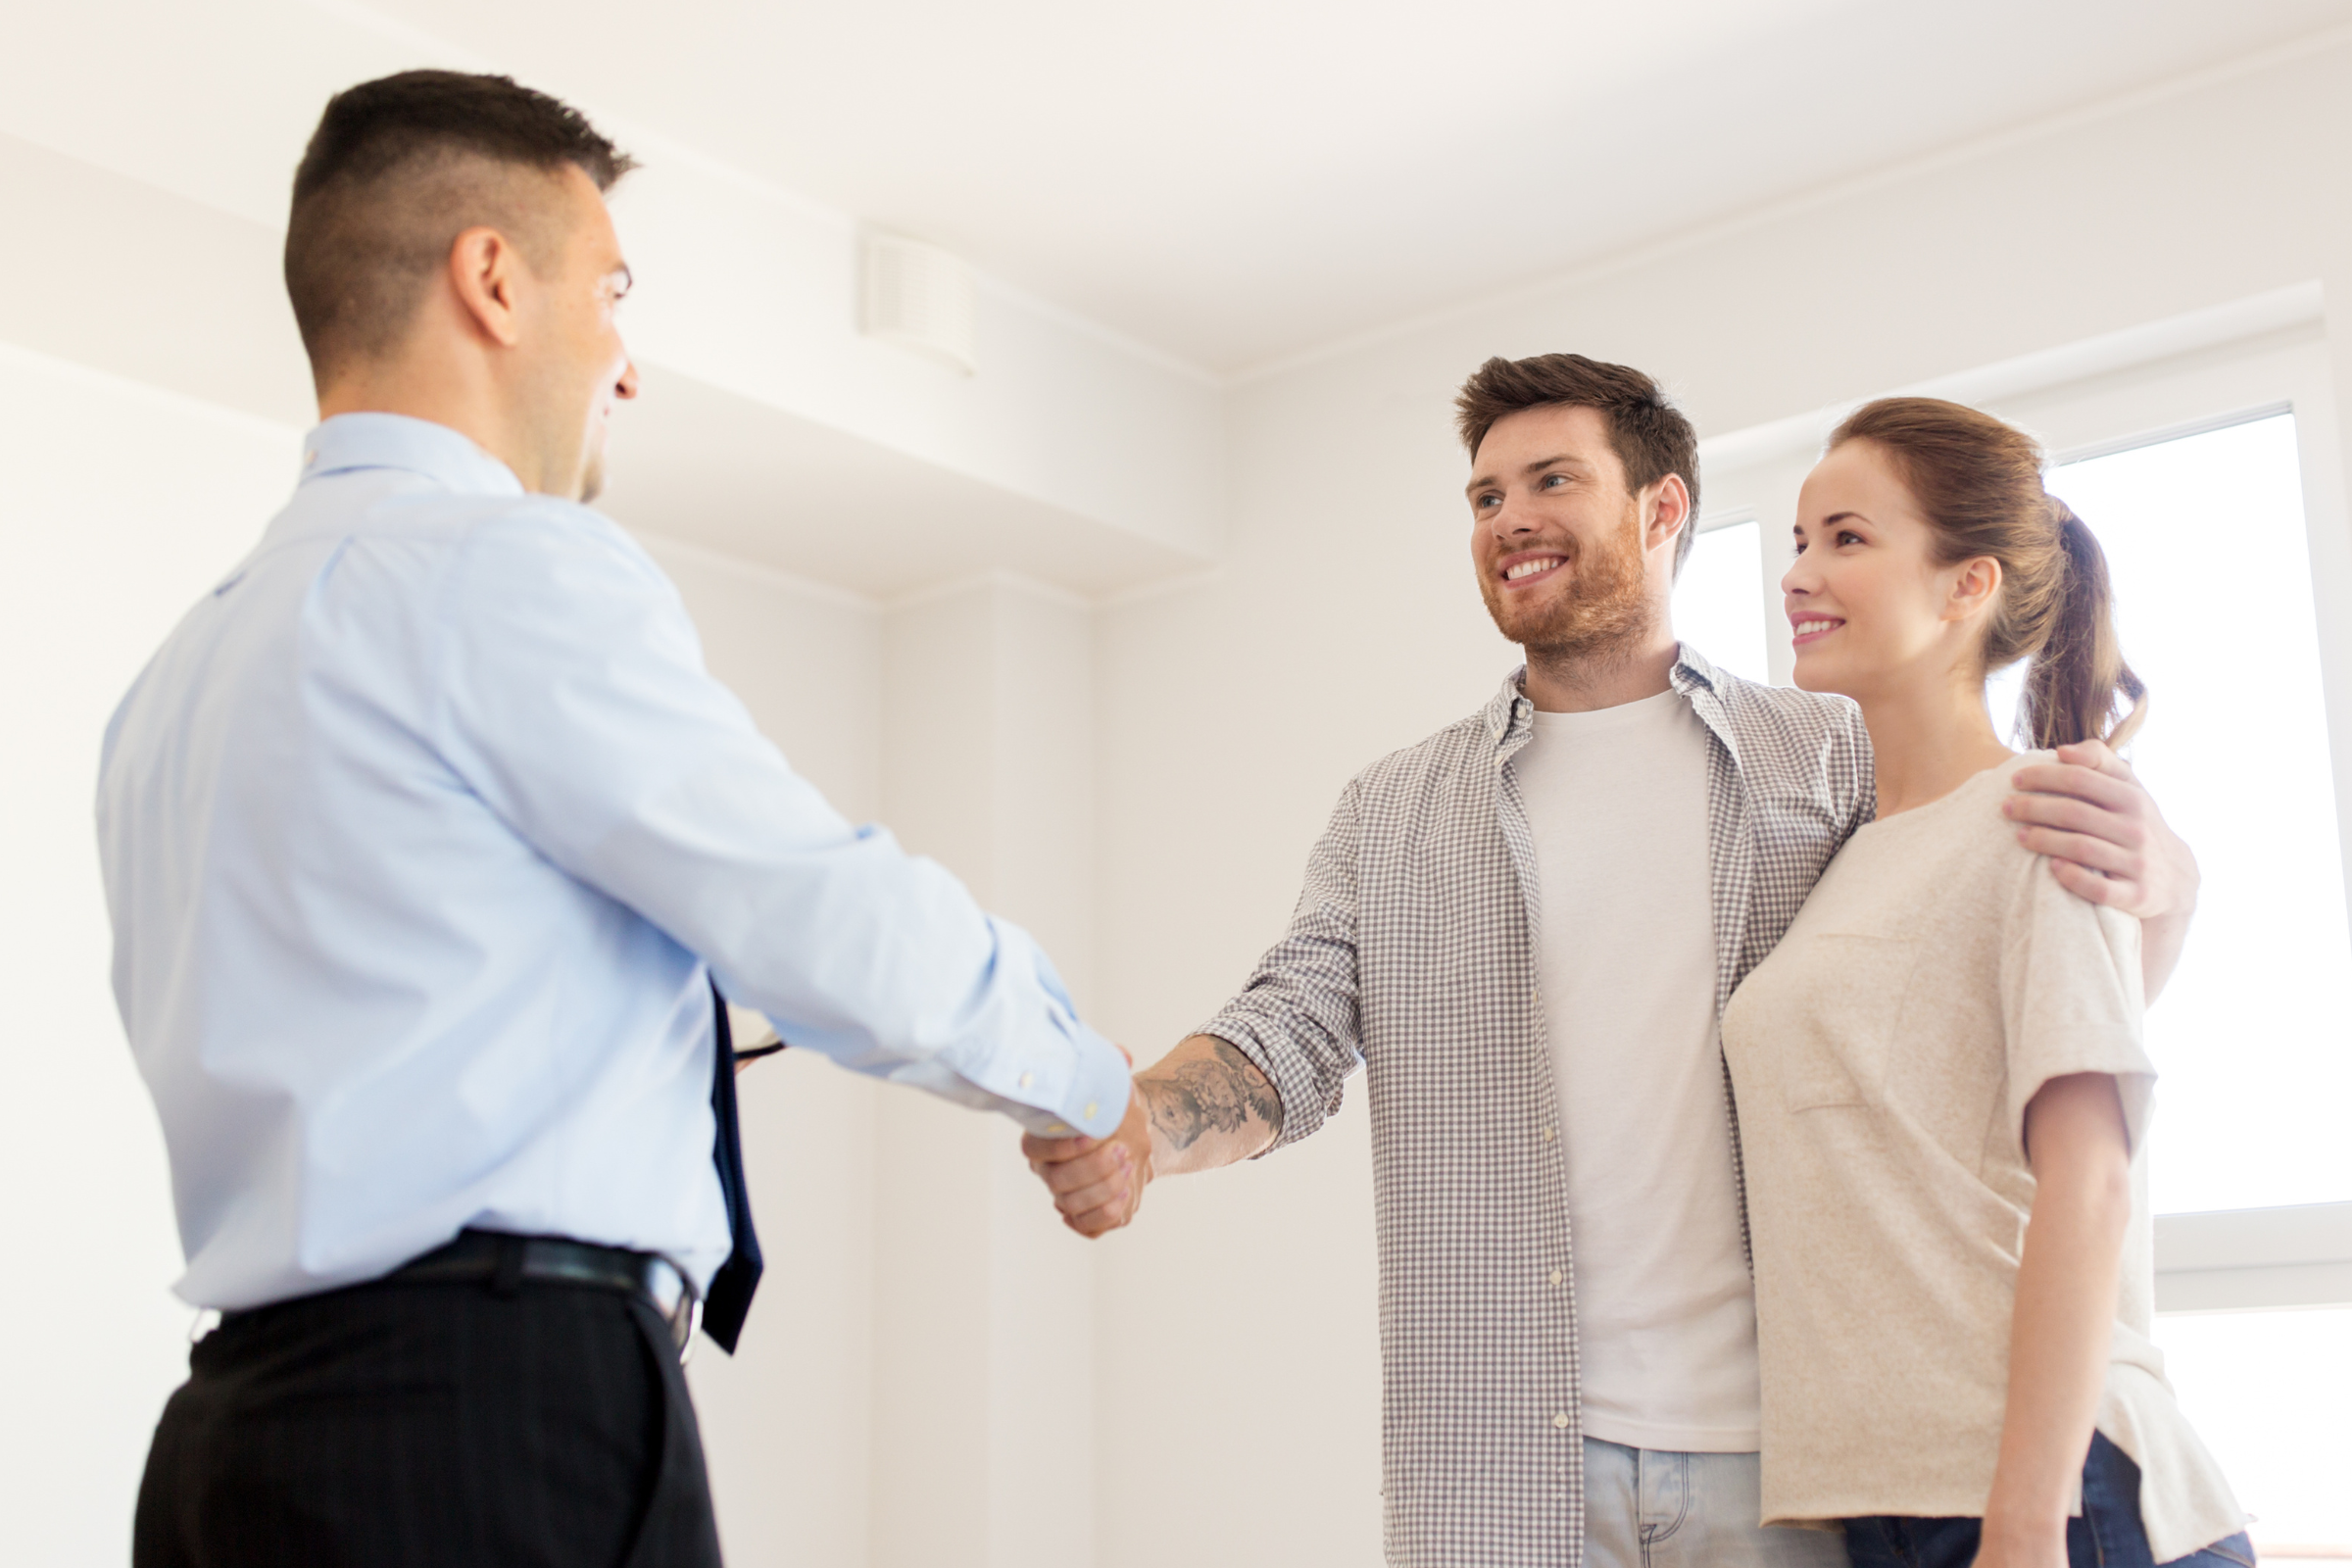 Young couple shaking hands with realtor or sales professional